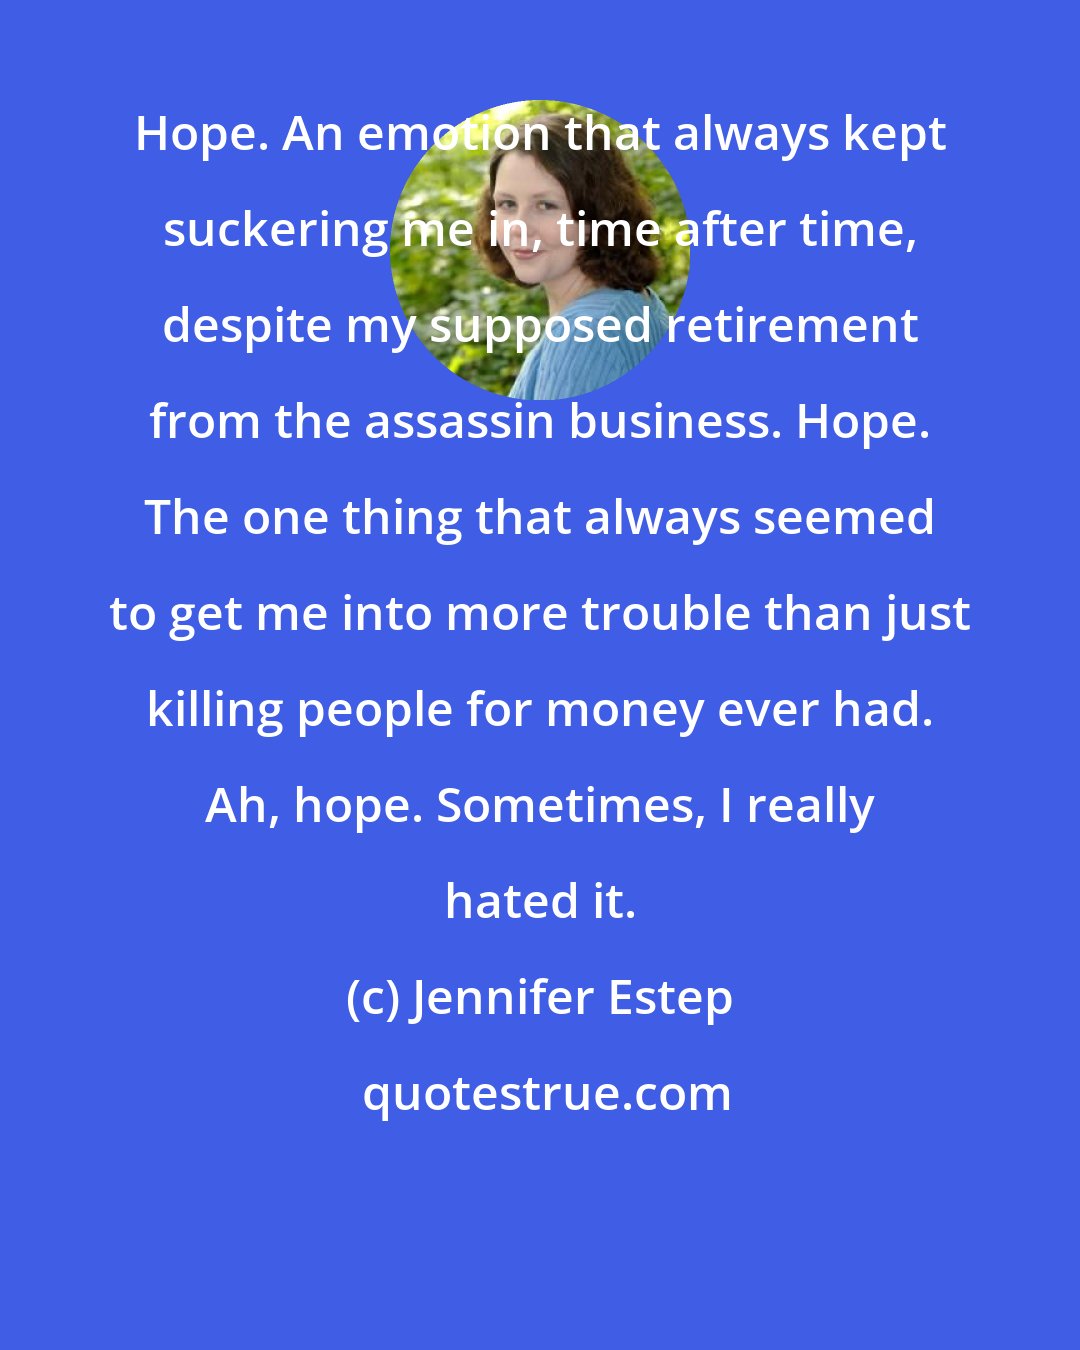 Jennifer Estep: Hope. An emotion that always kept suckering me in, time after time, despite my supposed retirement from the assassin business. Hope. The one thing that always seemed to get me into more trouble than just killing people for money ever had. Ah, hope. Sometimes, I really hated it.